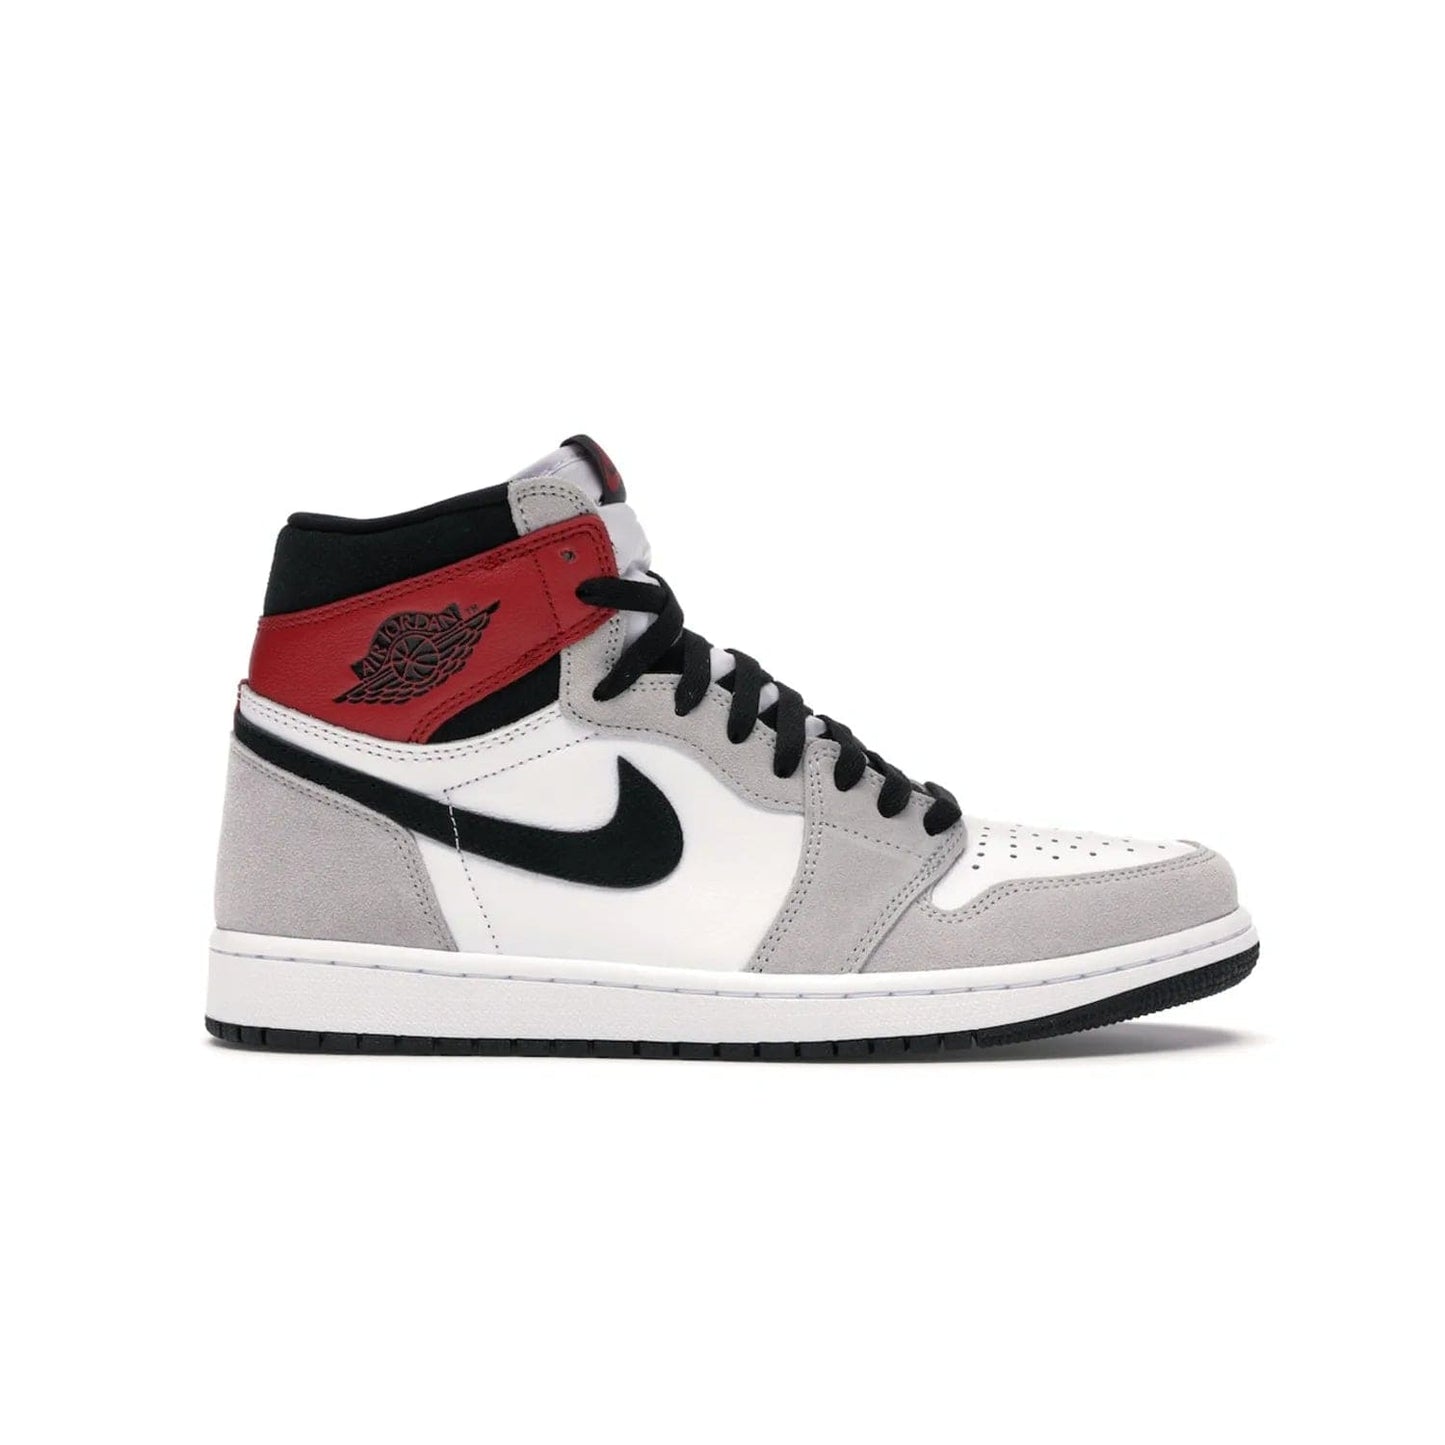 Jordan 1 Retro High Light Smoke Grey - Image 1 - Only at www.BallersClubKickz.com - Comfortable and stylish, Jordan 1 Retro High Light Smoke Grey offers a unique spin on a classic design. White leather, grey suede, red leather and black details are set on a white midsole and black outsole. Get the sneaker released in July 2020 and add a twist to your wardrobe.